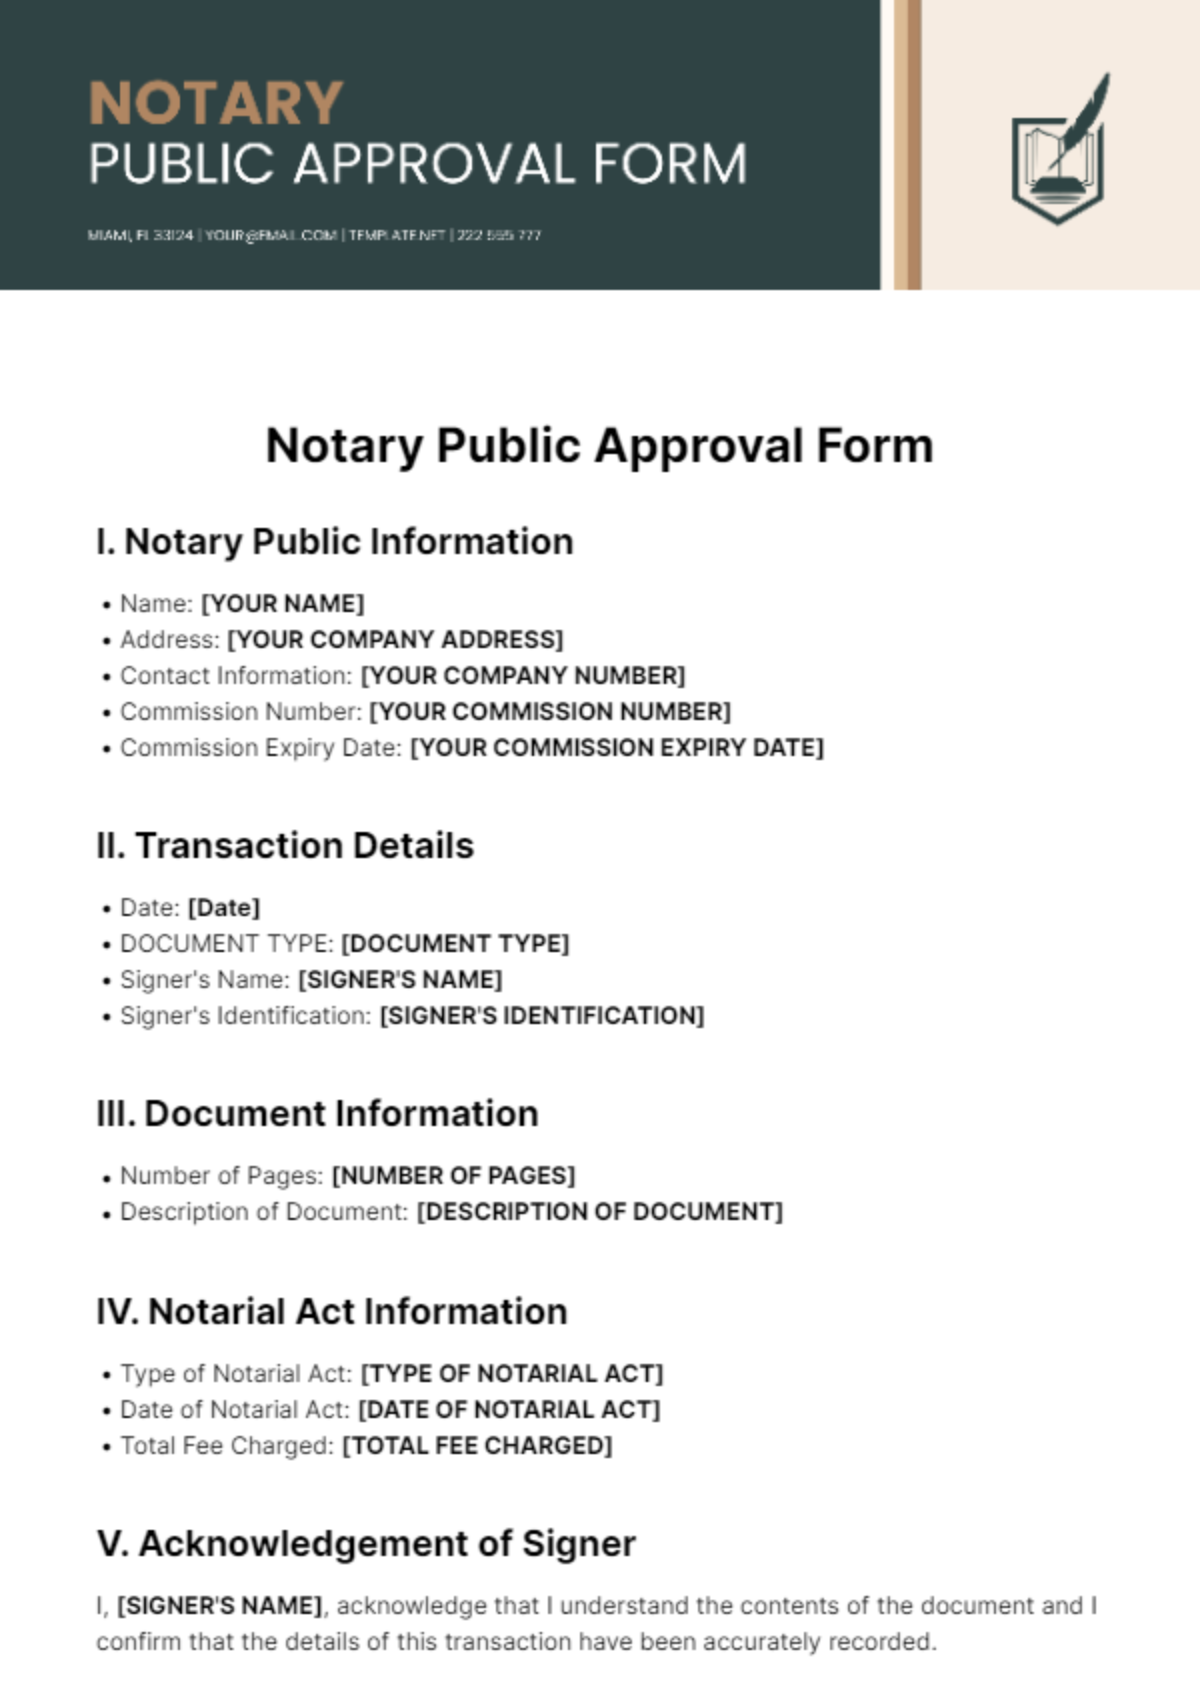 Notary Public Approval Form Template